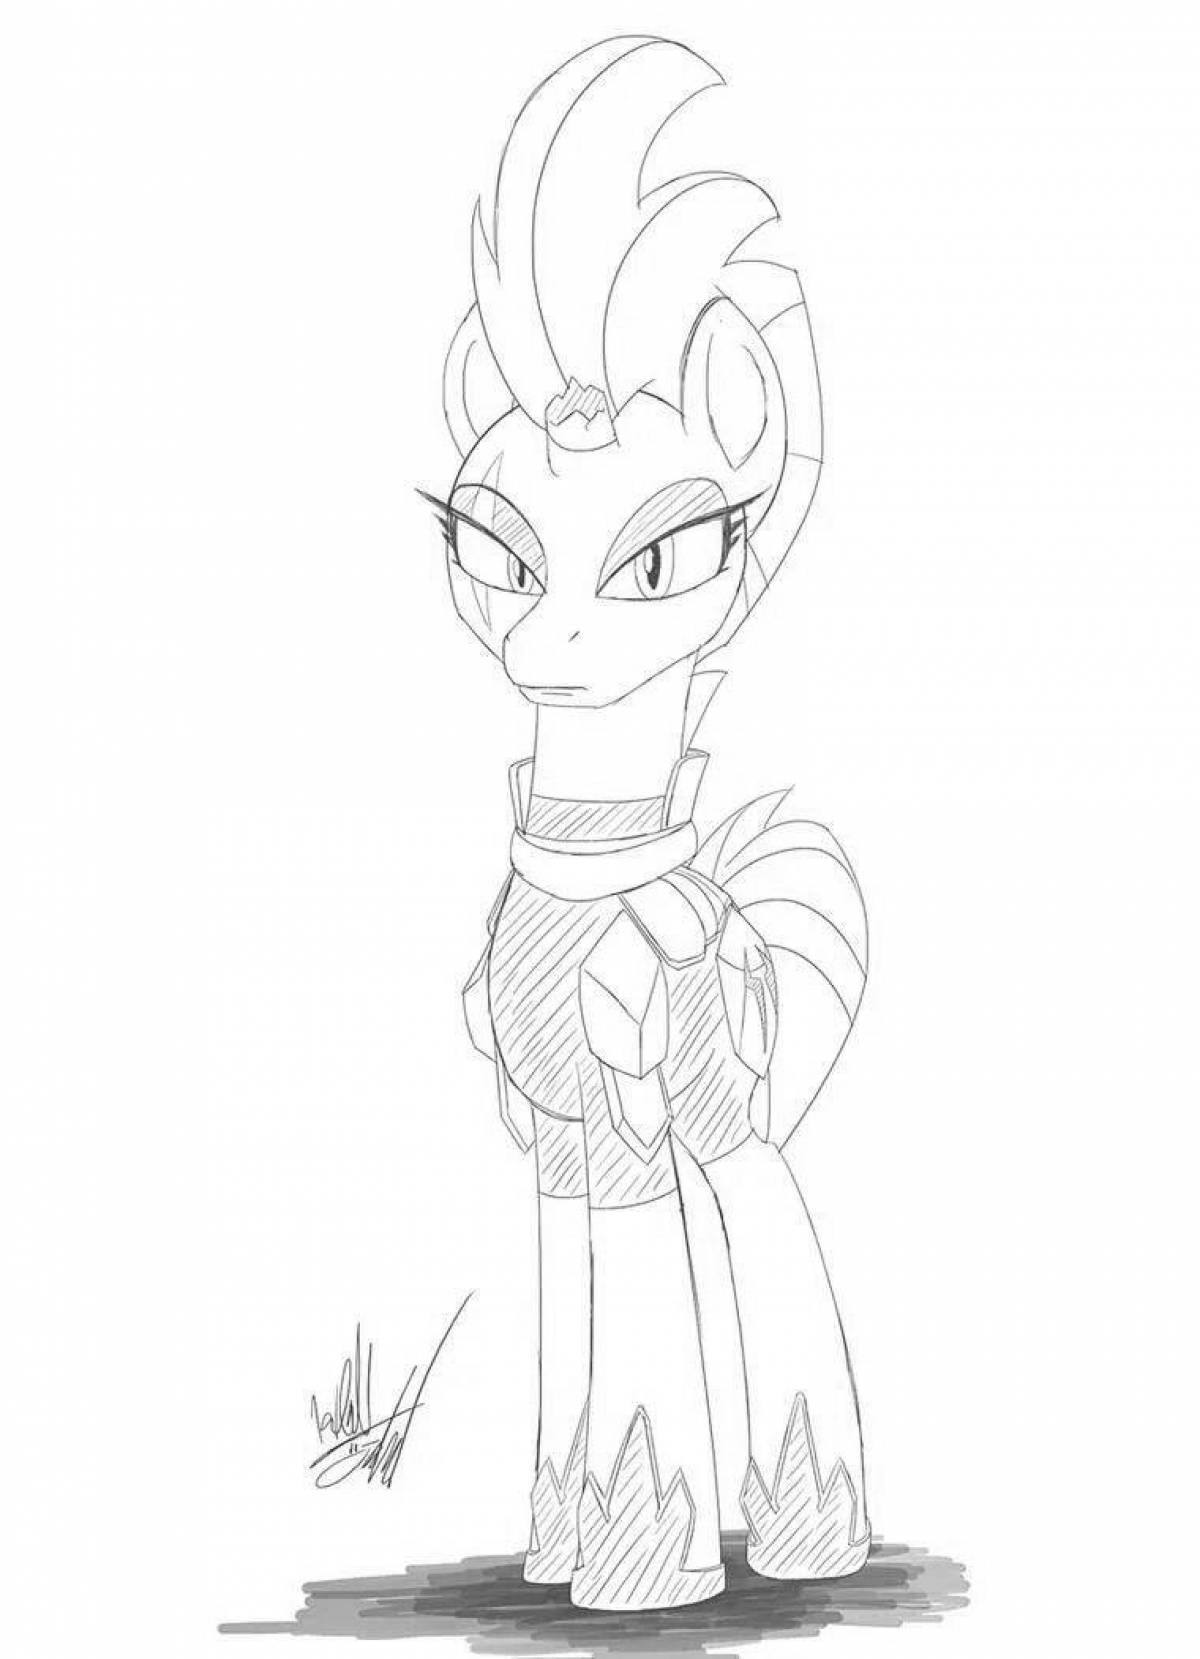 Majestic storm pony coloring page